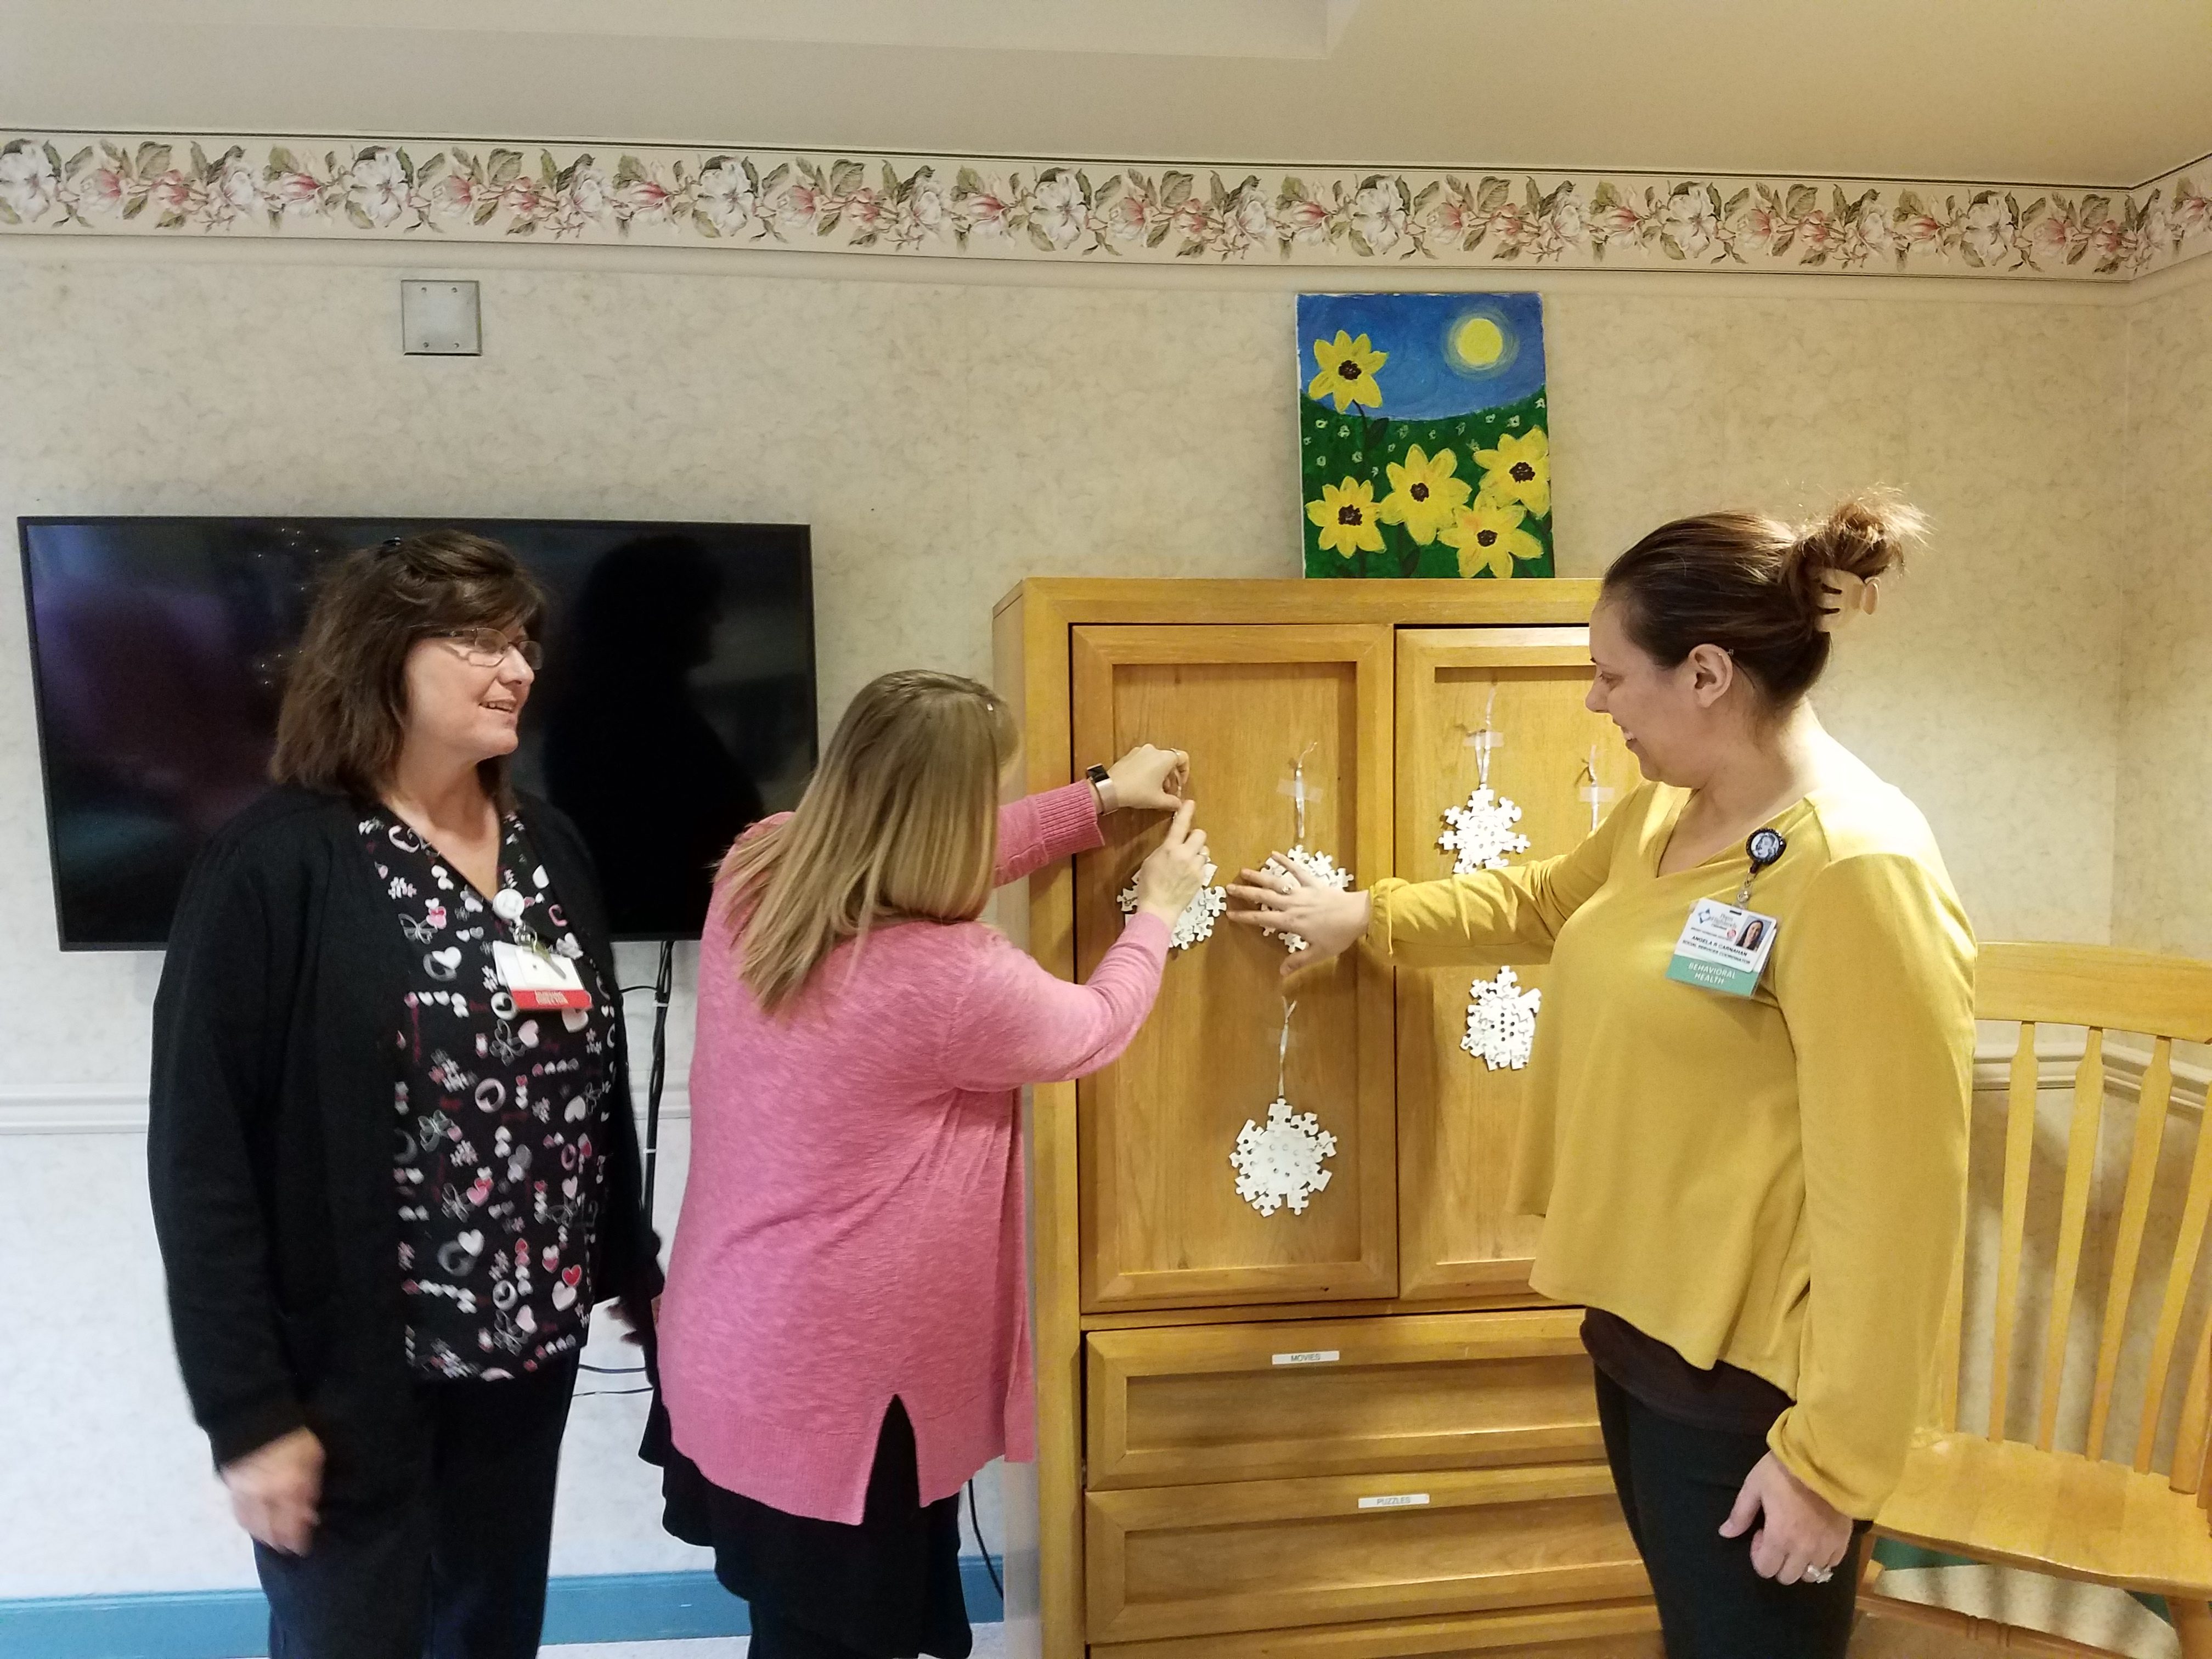 Sharon Goodman, Behavioral Health Inpatient Director, left, hangs snowflakes with staff members at Bright Horizons Inpatient Clinic at Penn Highlands Clearfield. The snowflakes were made as an arts and crafts project by patients of the clinic. The short-term inpatient facility provides a multitude of behavioral health services to patients 55 and older (Photo by Kimberly Finnigan)